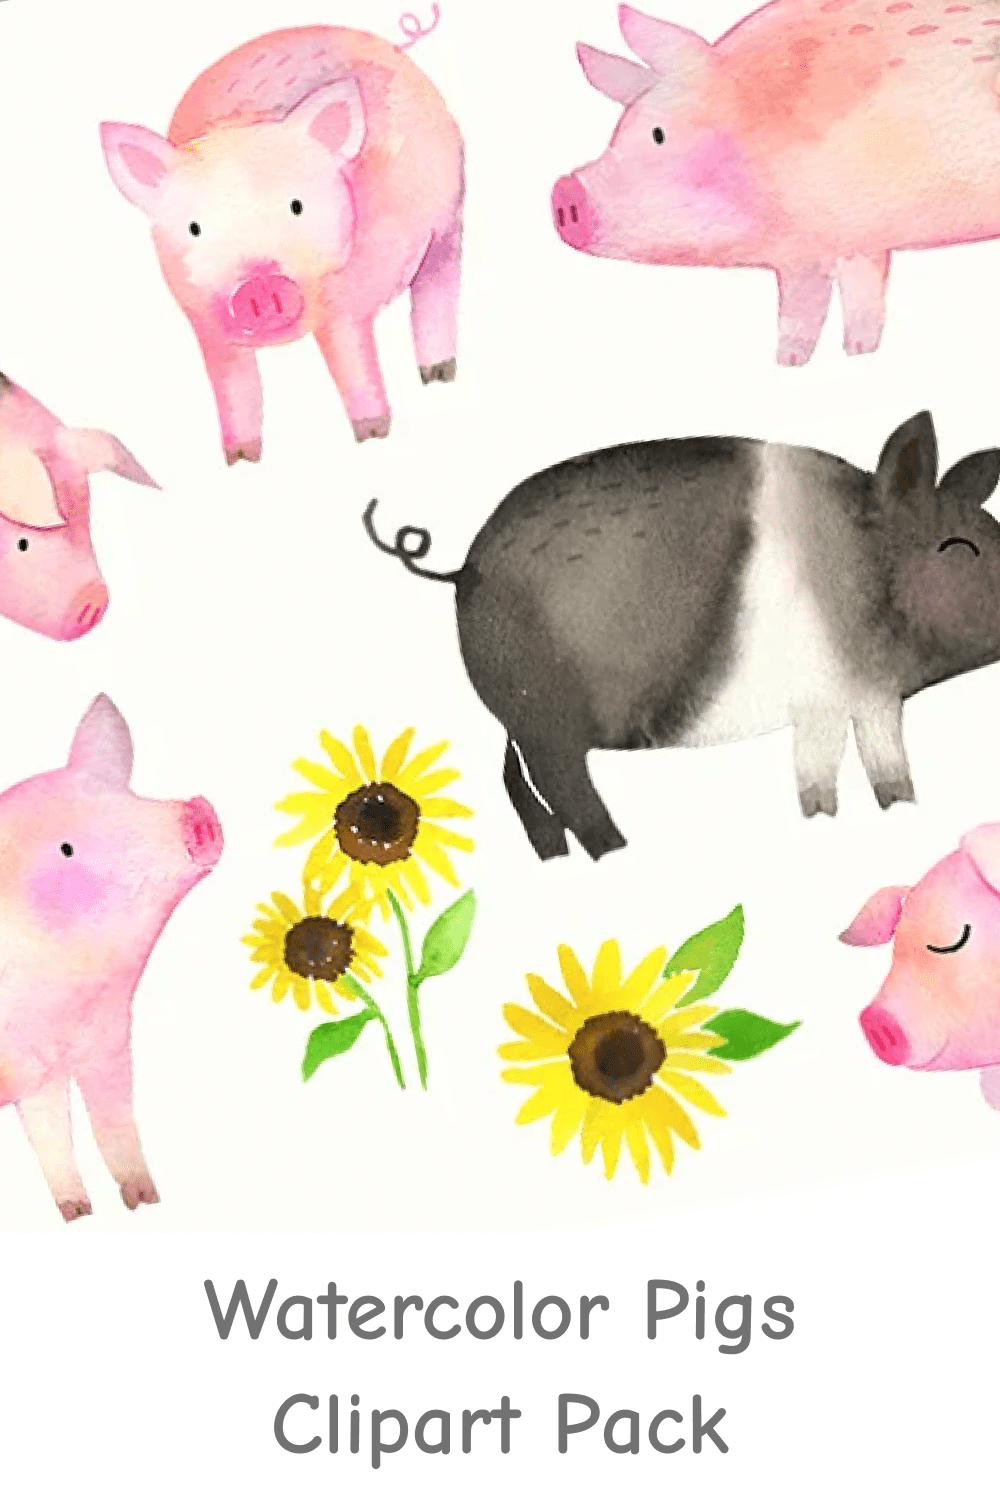 Watercolor Pigs Clipart Pack.